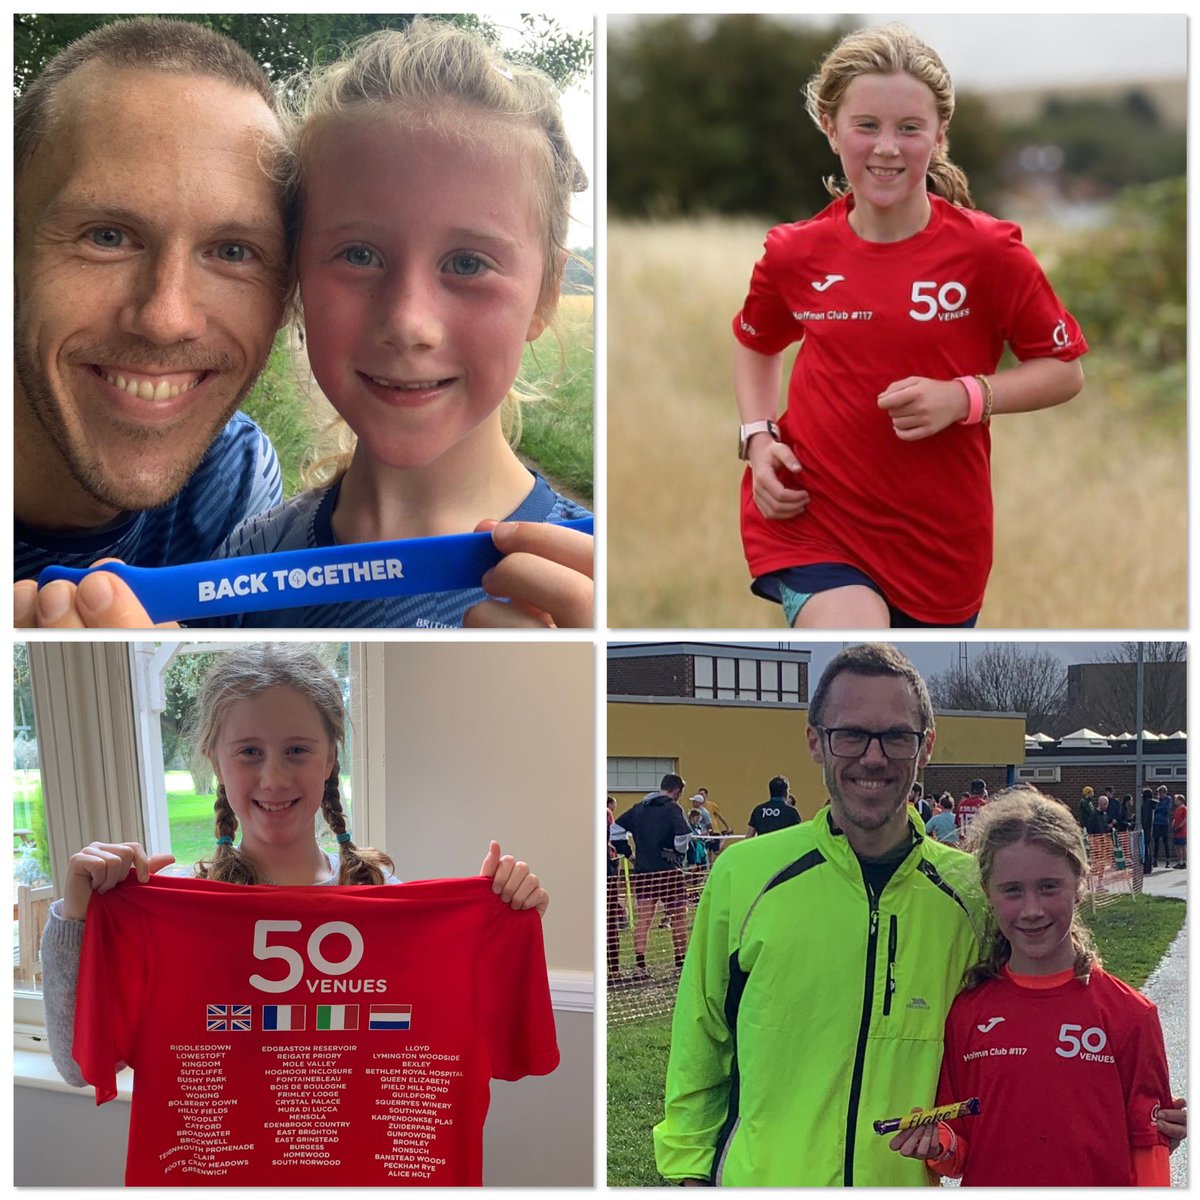 On Saturday Alexa completes her 100th parkrun - Sandhurst Memorial @smparkrun will also be her 100th different location, making her only the 78th member of the ‘Bailey’ club (2nd under 18). Please join the celebrations! @parkrunUK @PSH_A1674